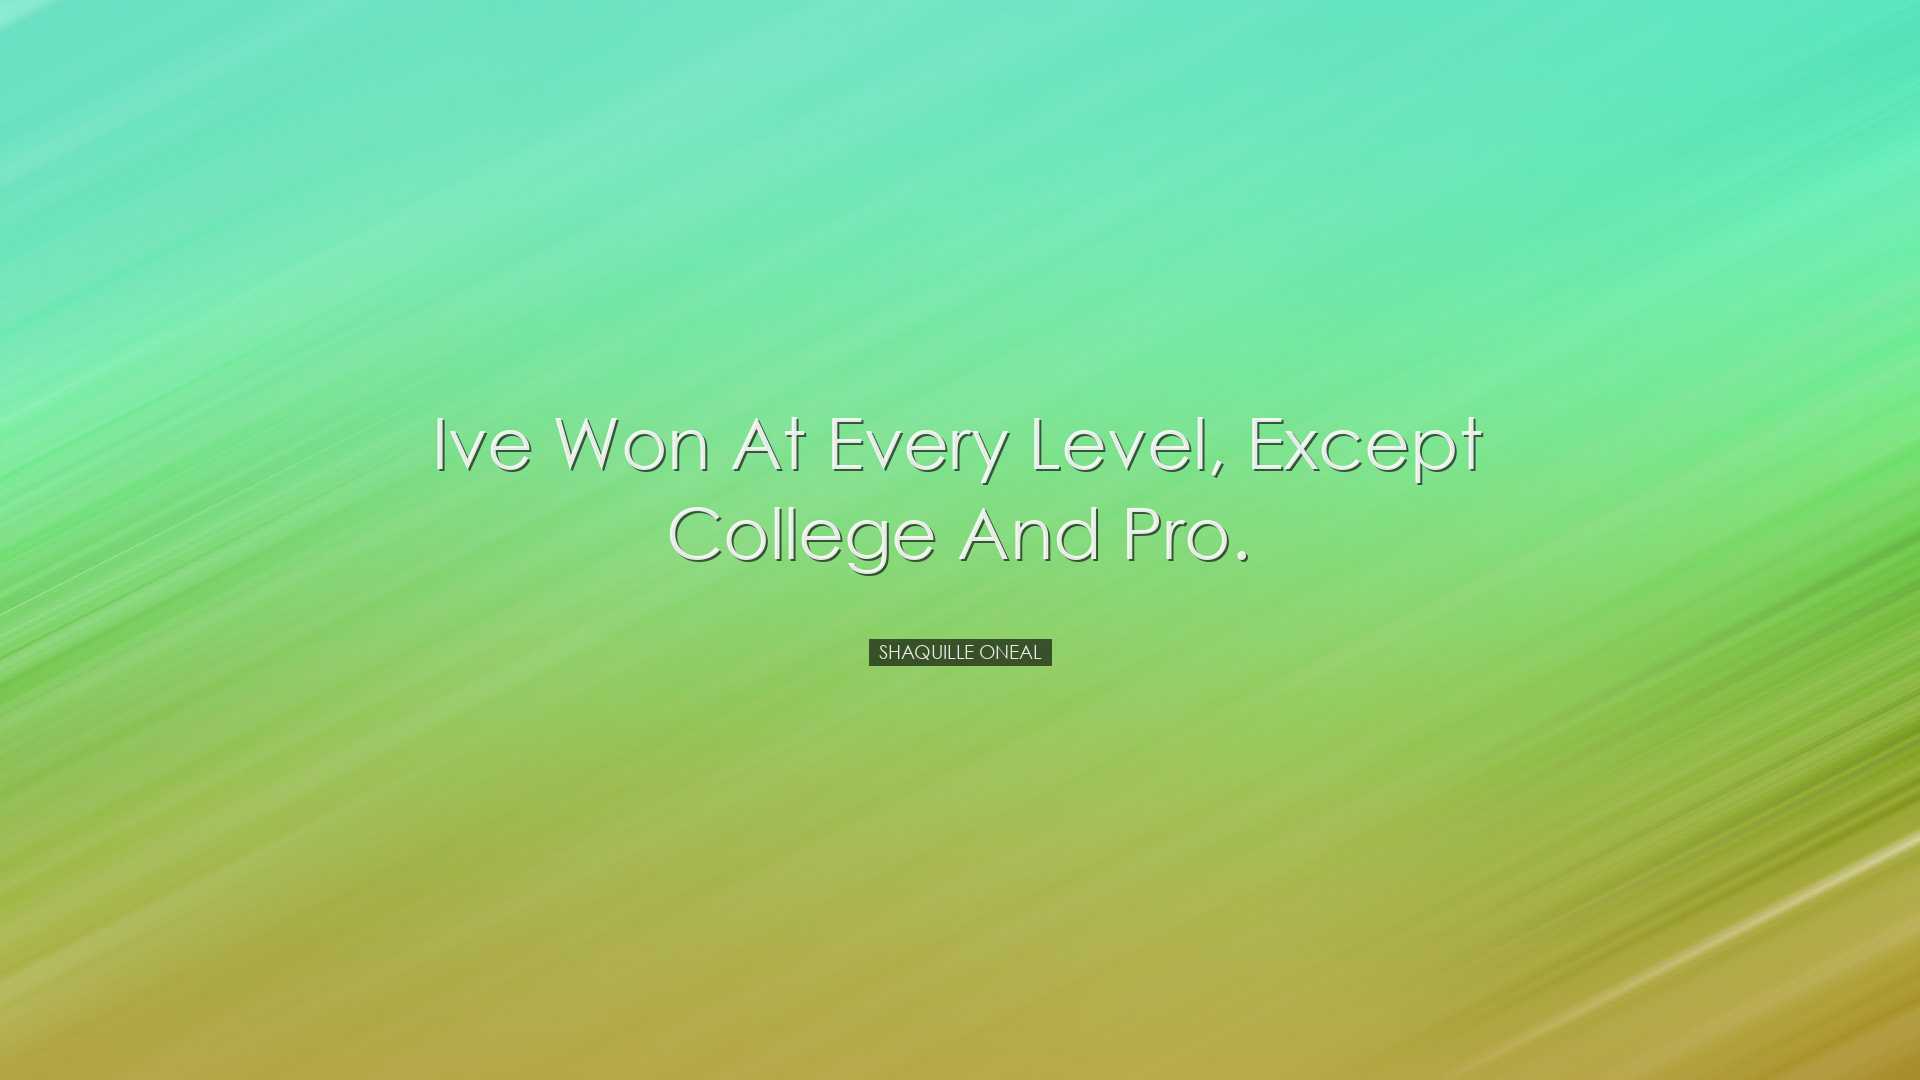 Ive won at every level, except college and pro. - Shaquille ONeal